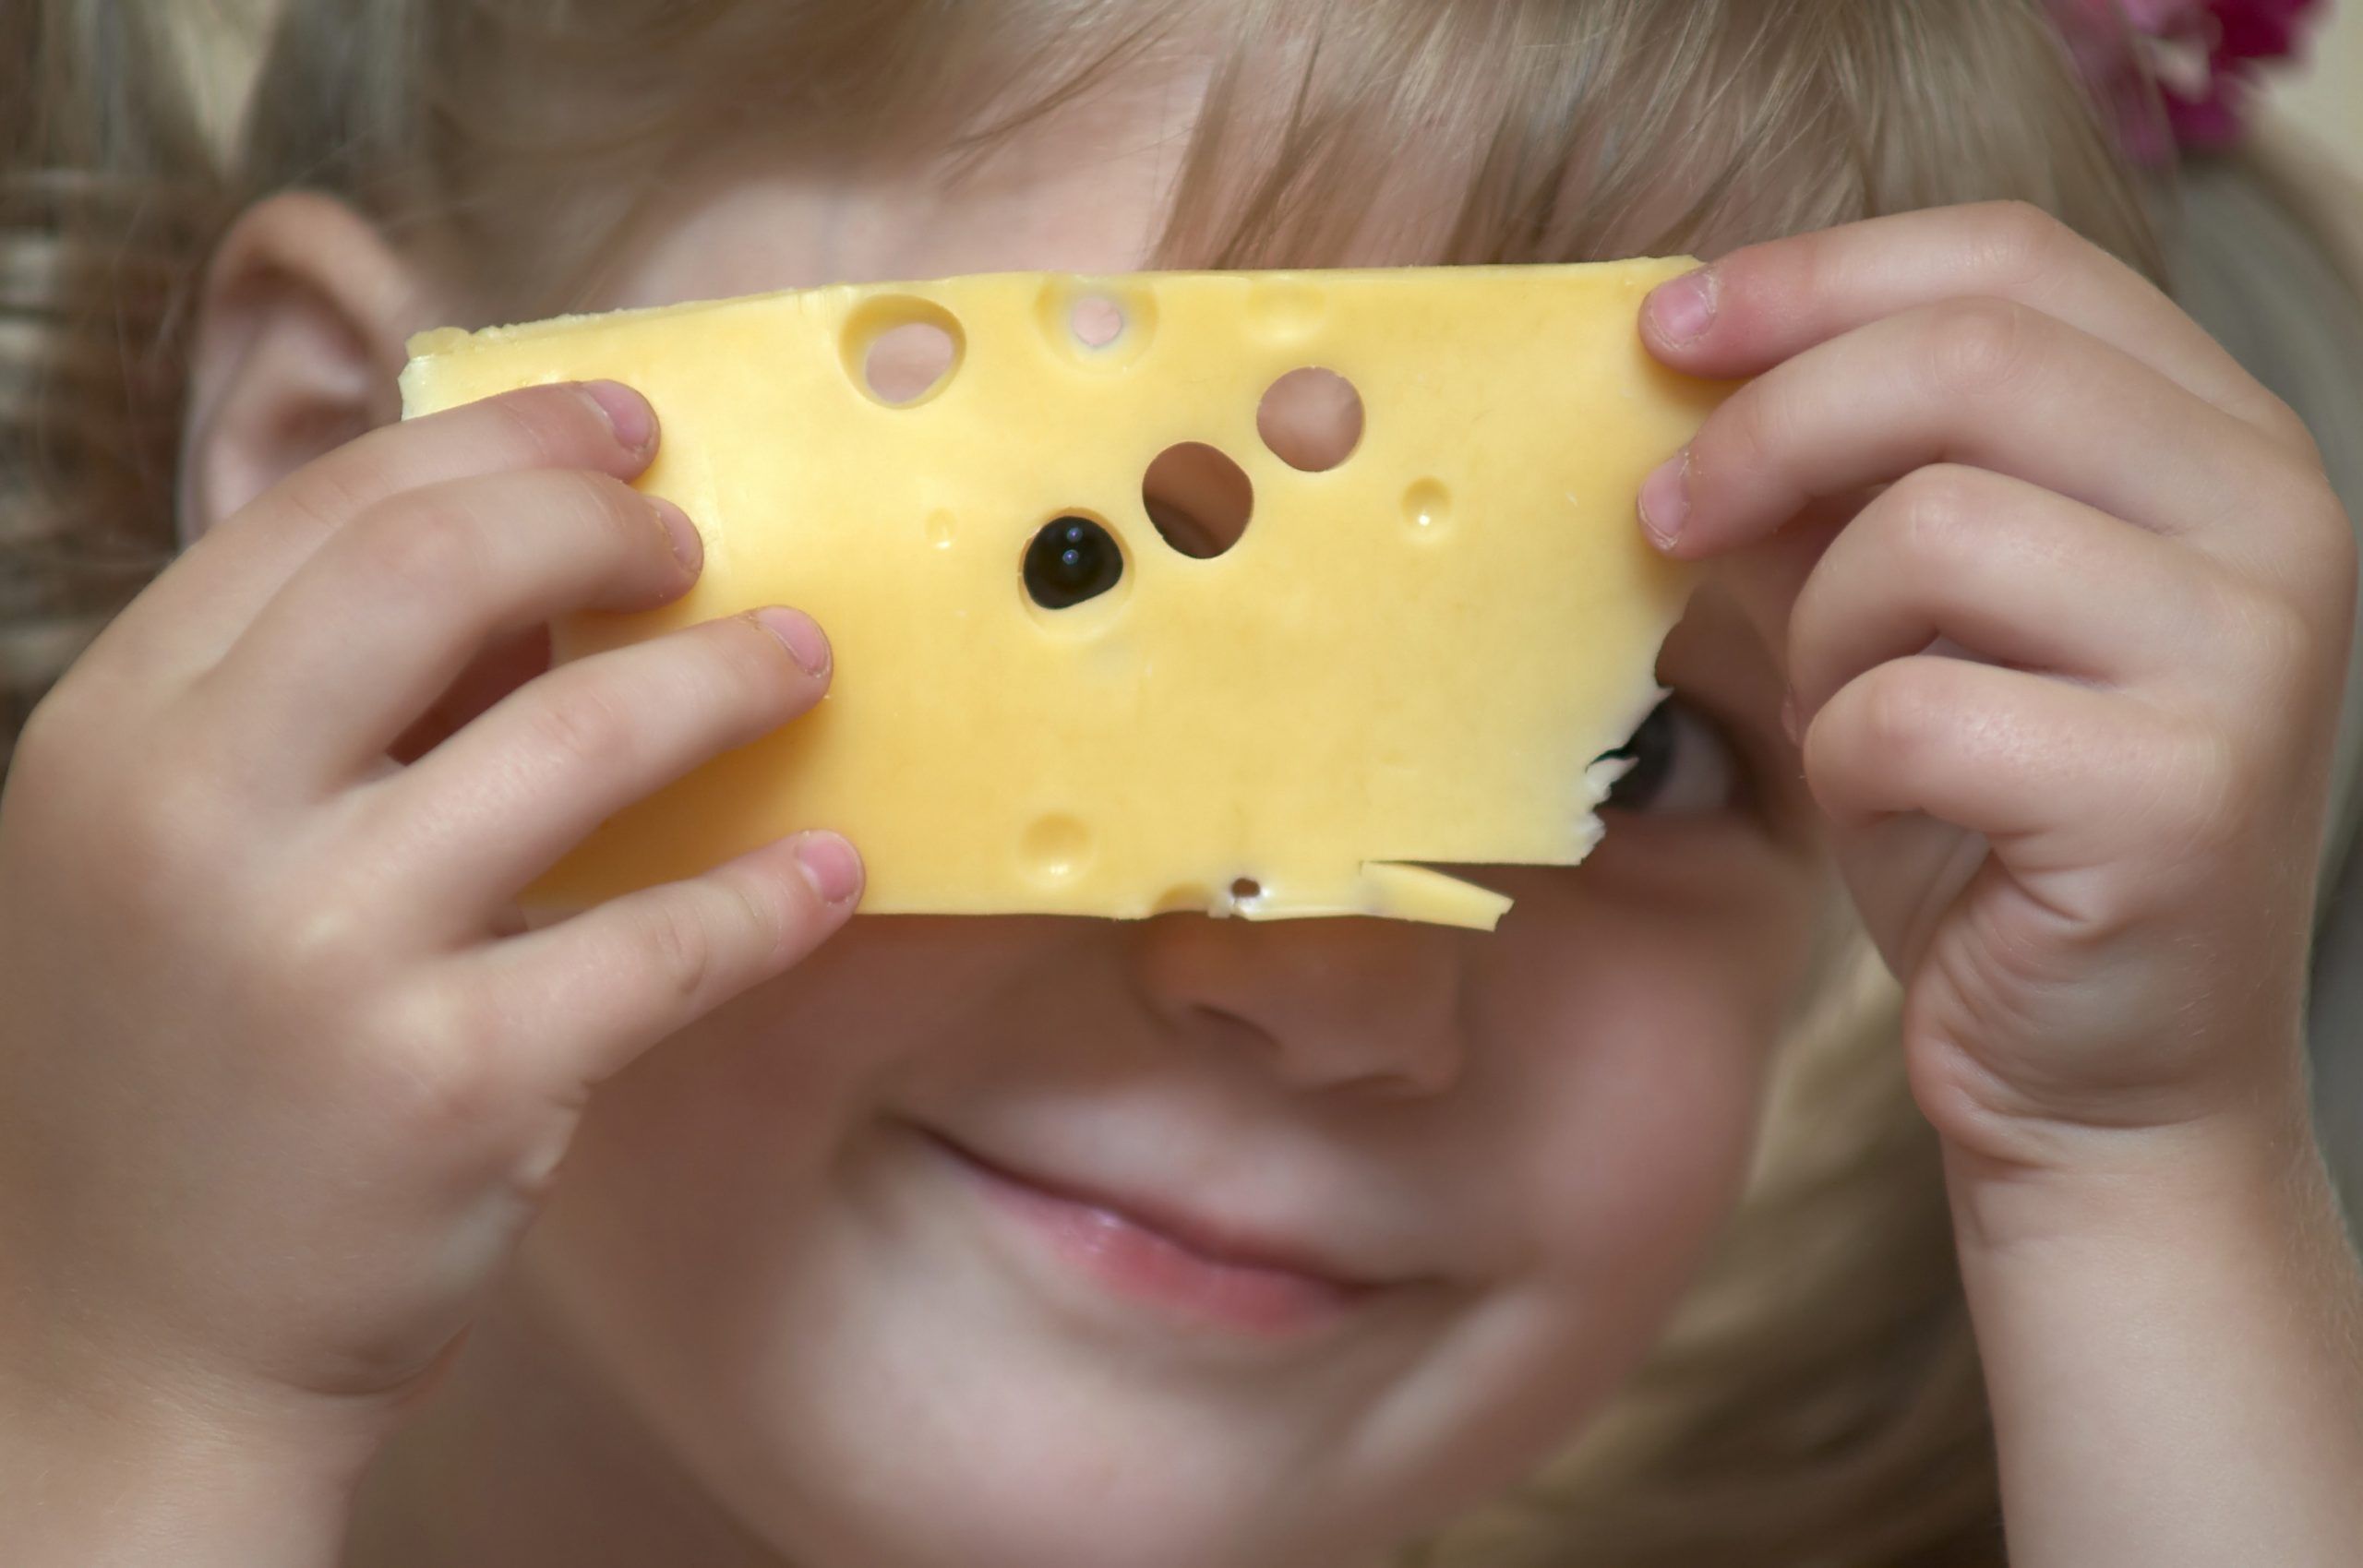 Cheese, red wine and lamb may be key foods to help prevent brain disease. GETTY